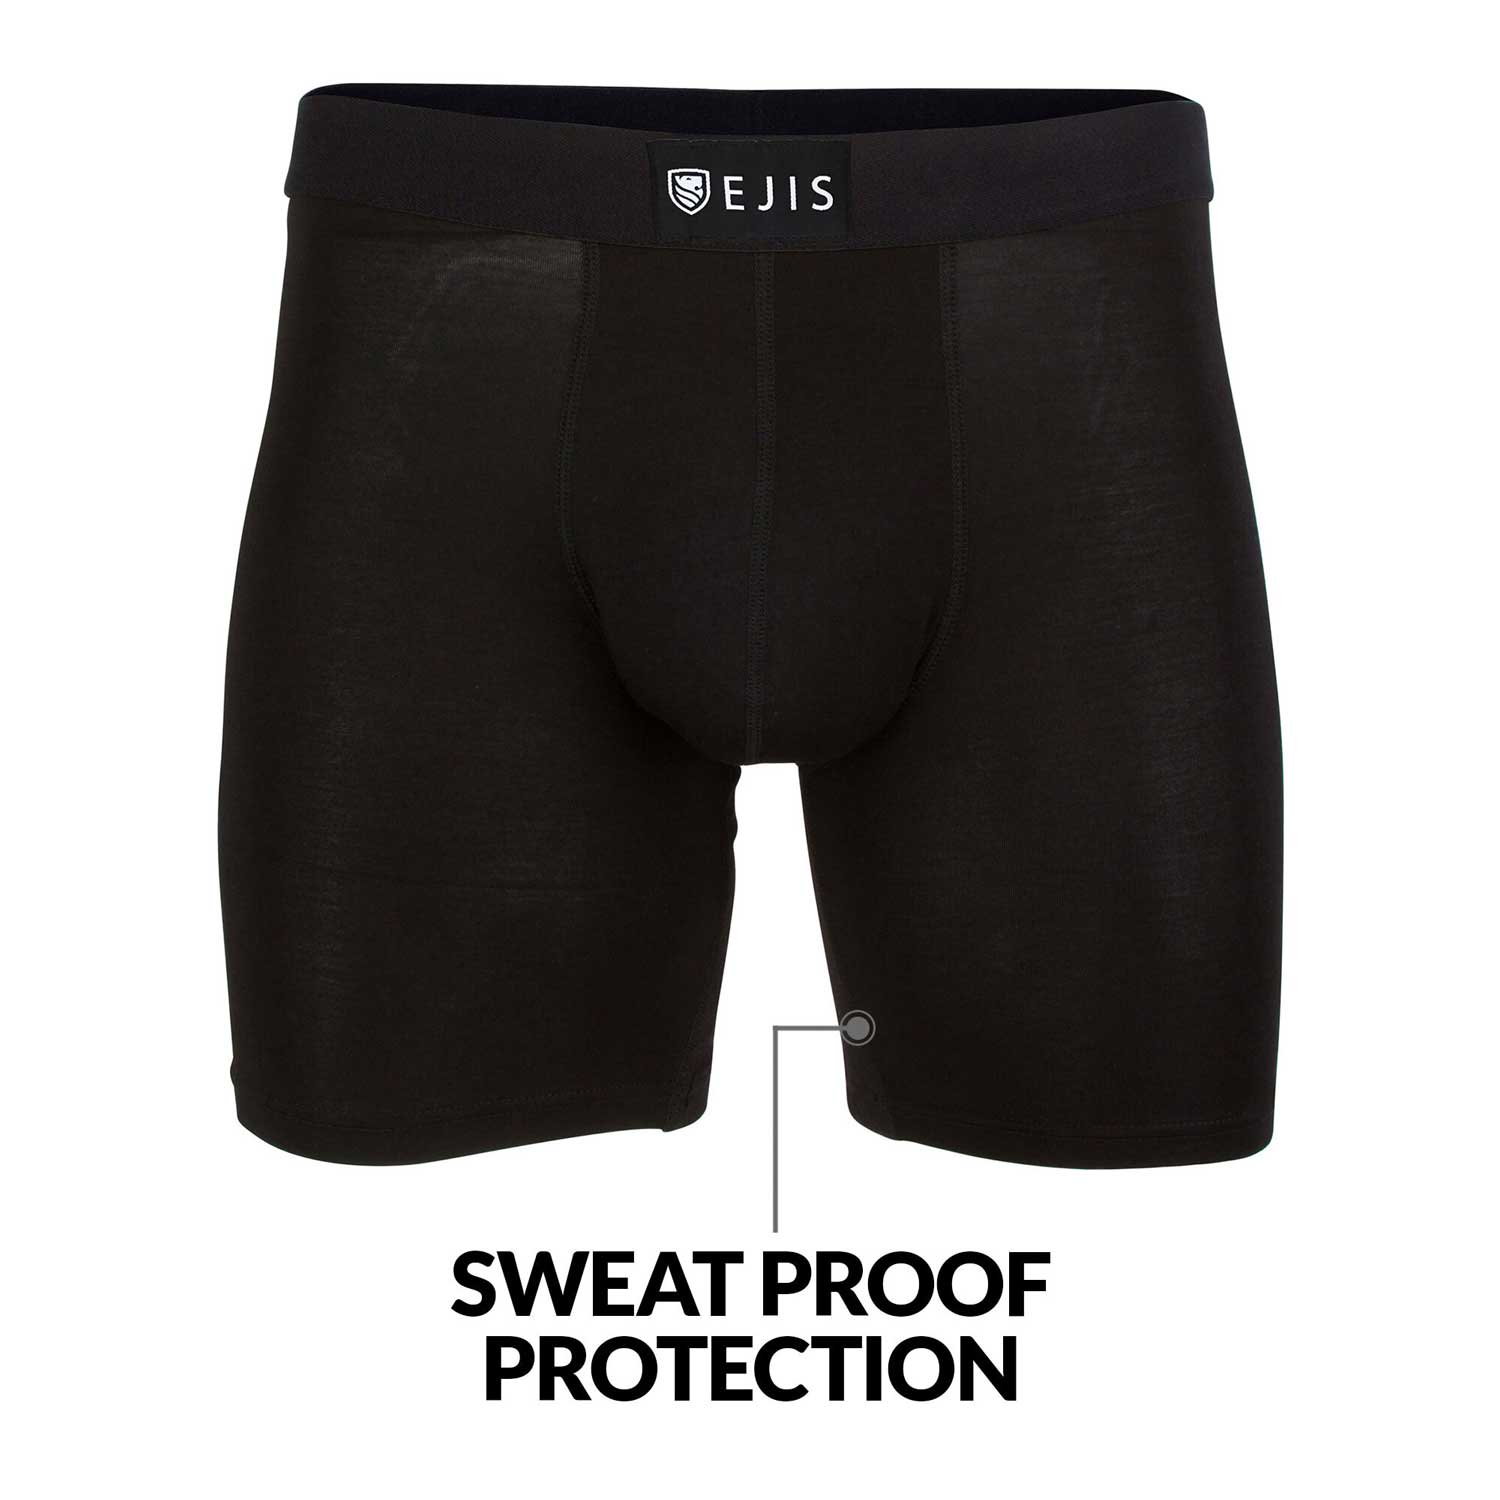 Ejis Sweat Proof Men's Boxer Briefs Micro Modal with Odor Fighting